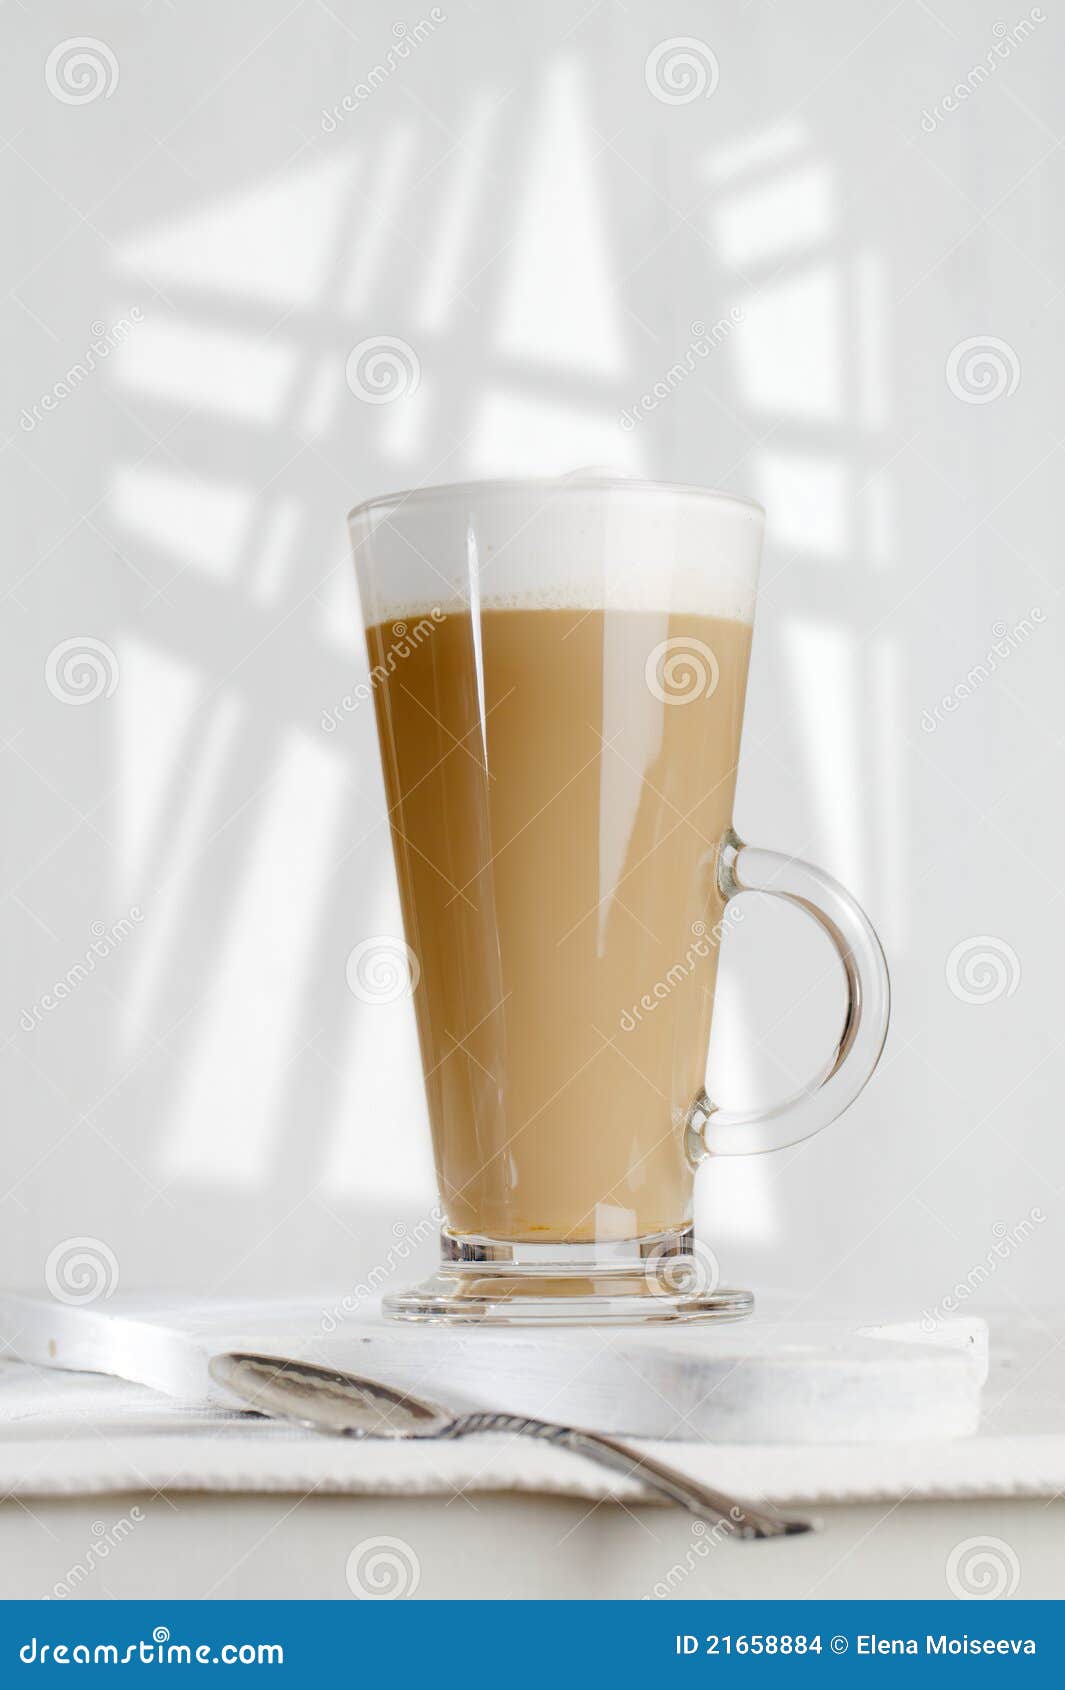 coffee latte with frothy milk in tall glass